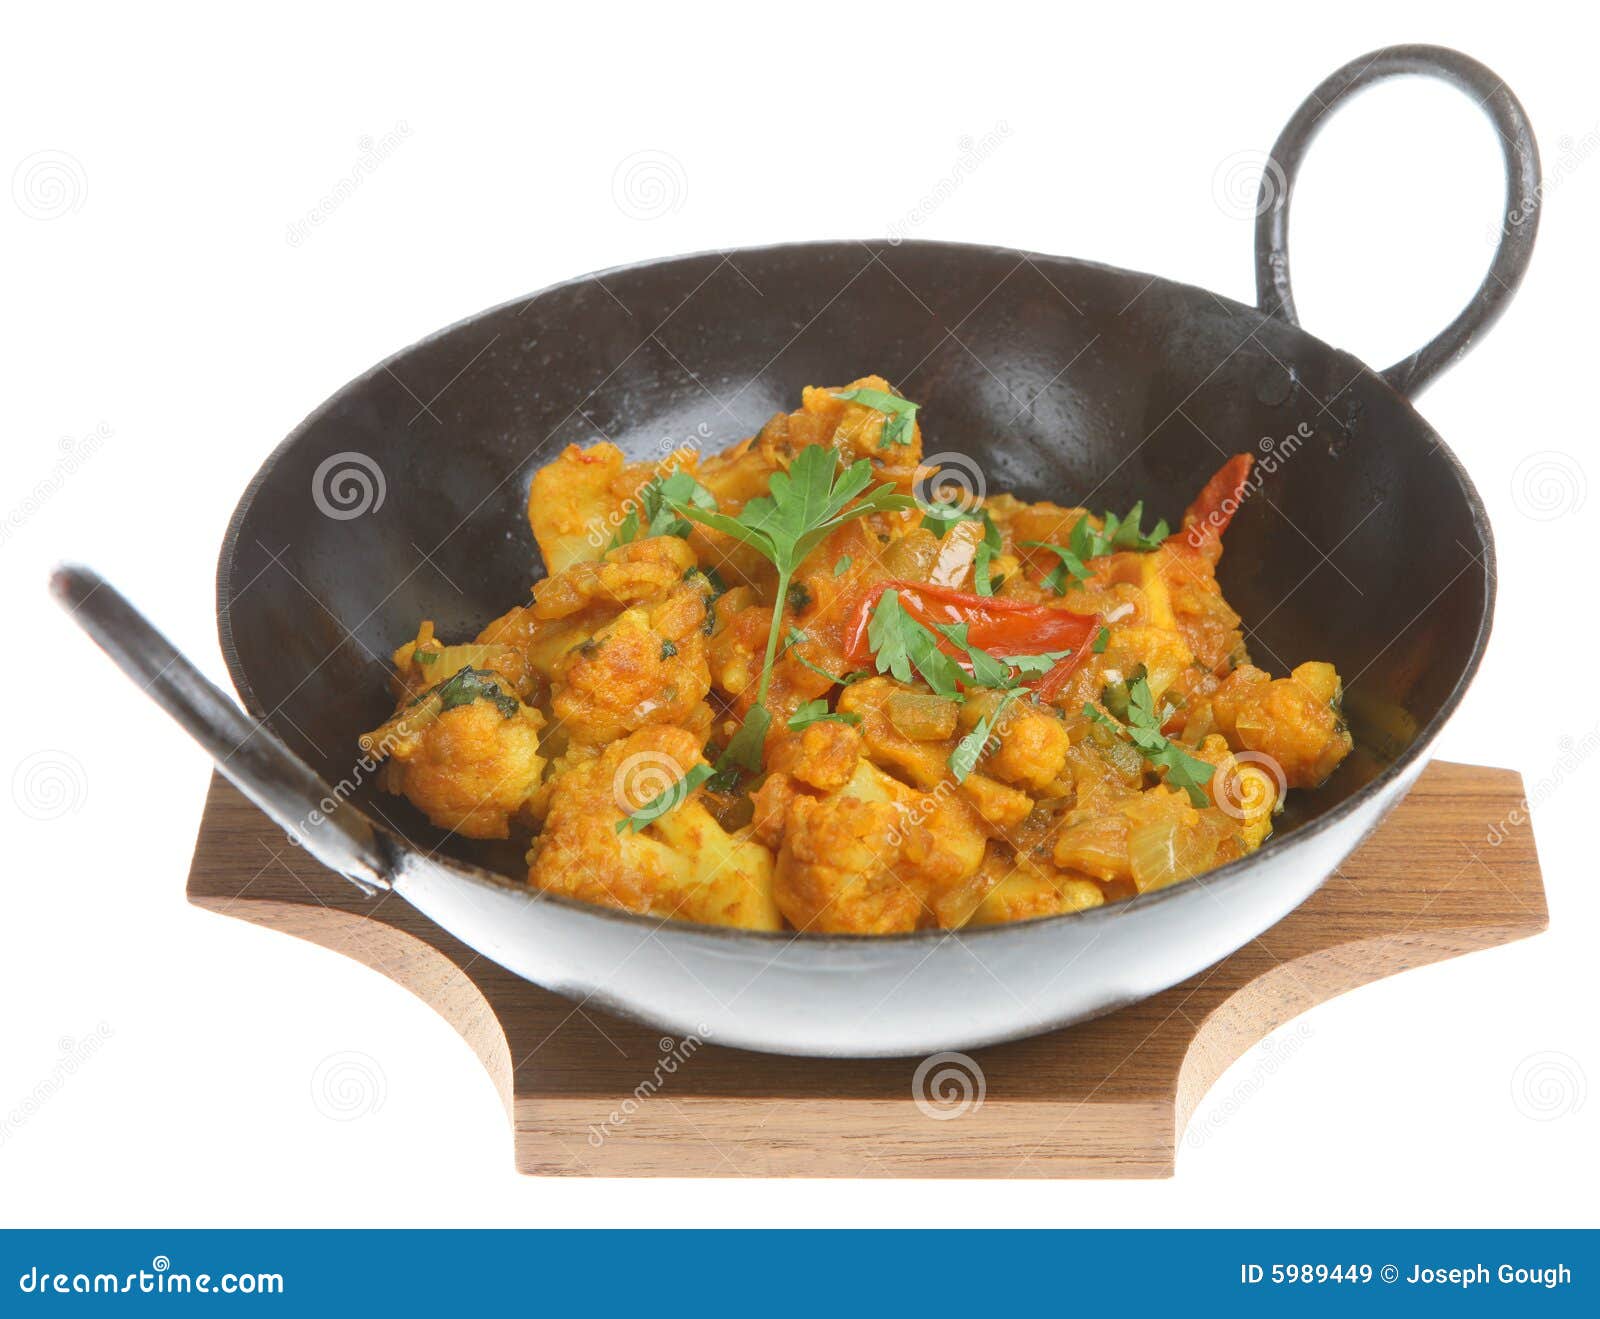 chicken curry clipart - photo #11